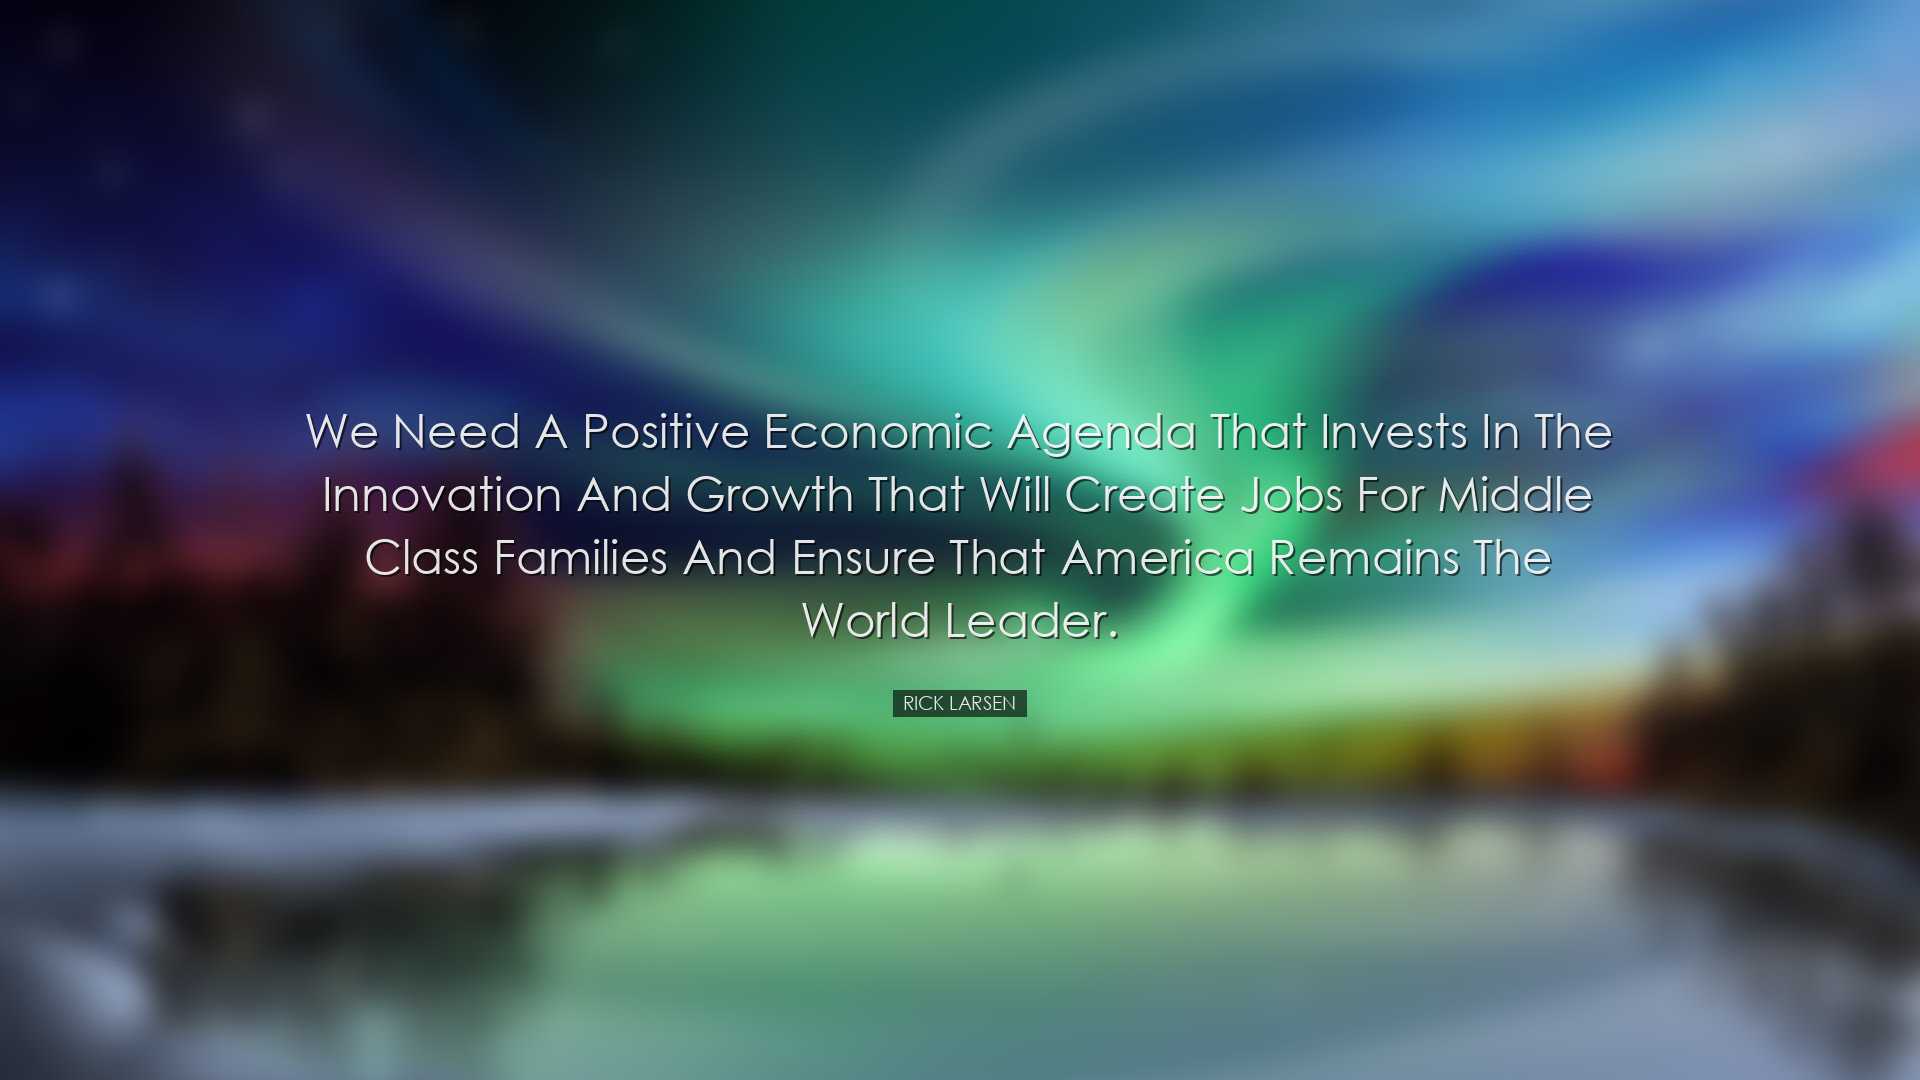 We need a positive economic agenda that invests in the innovation